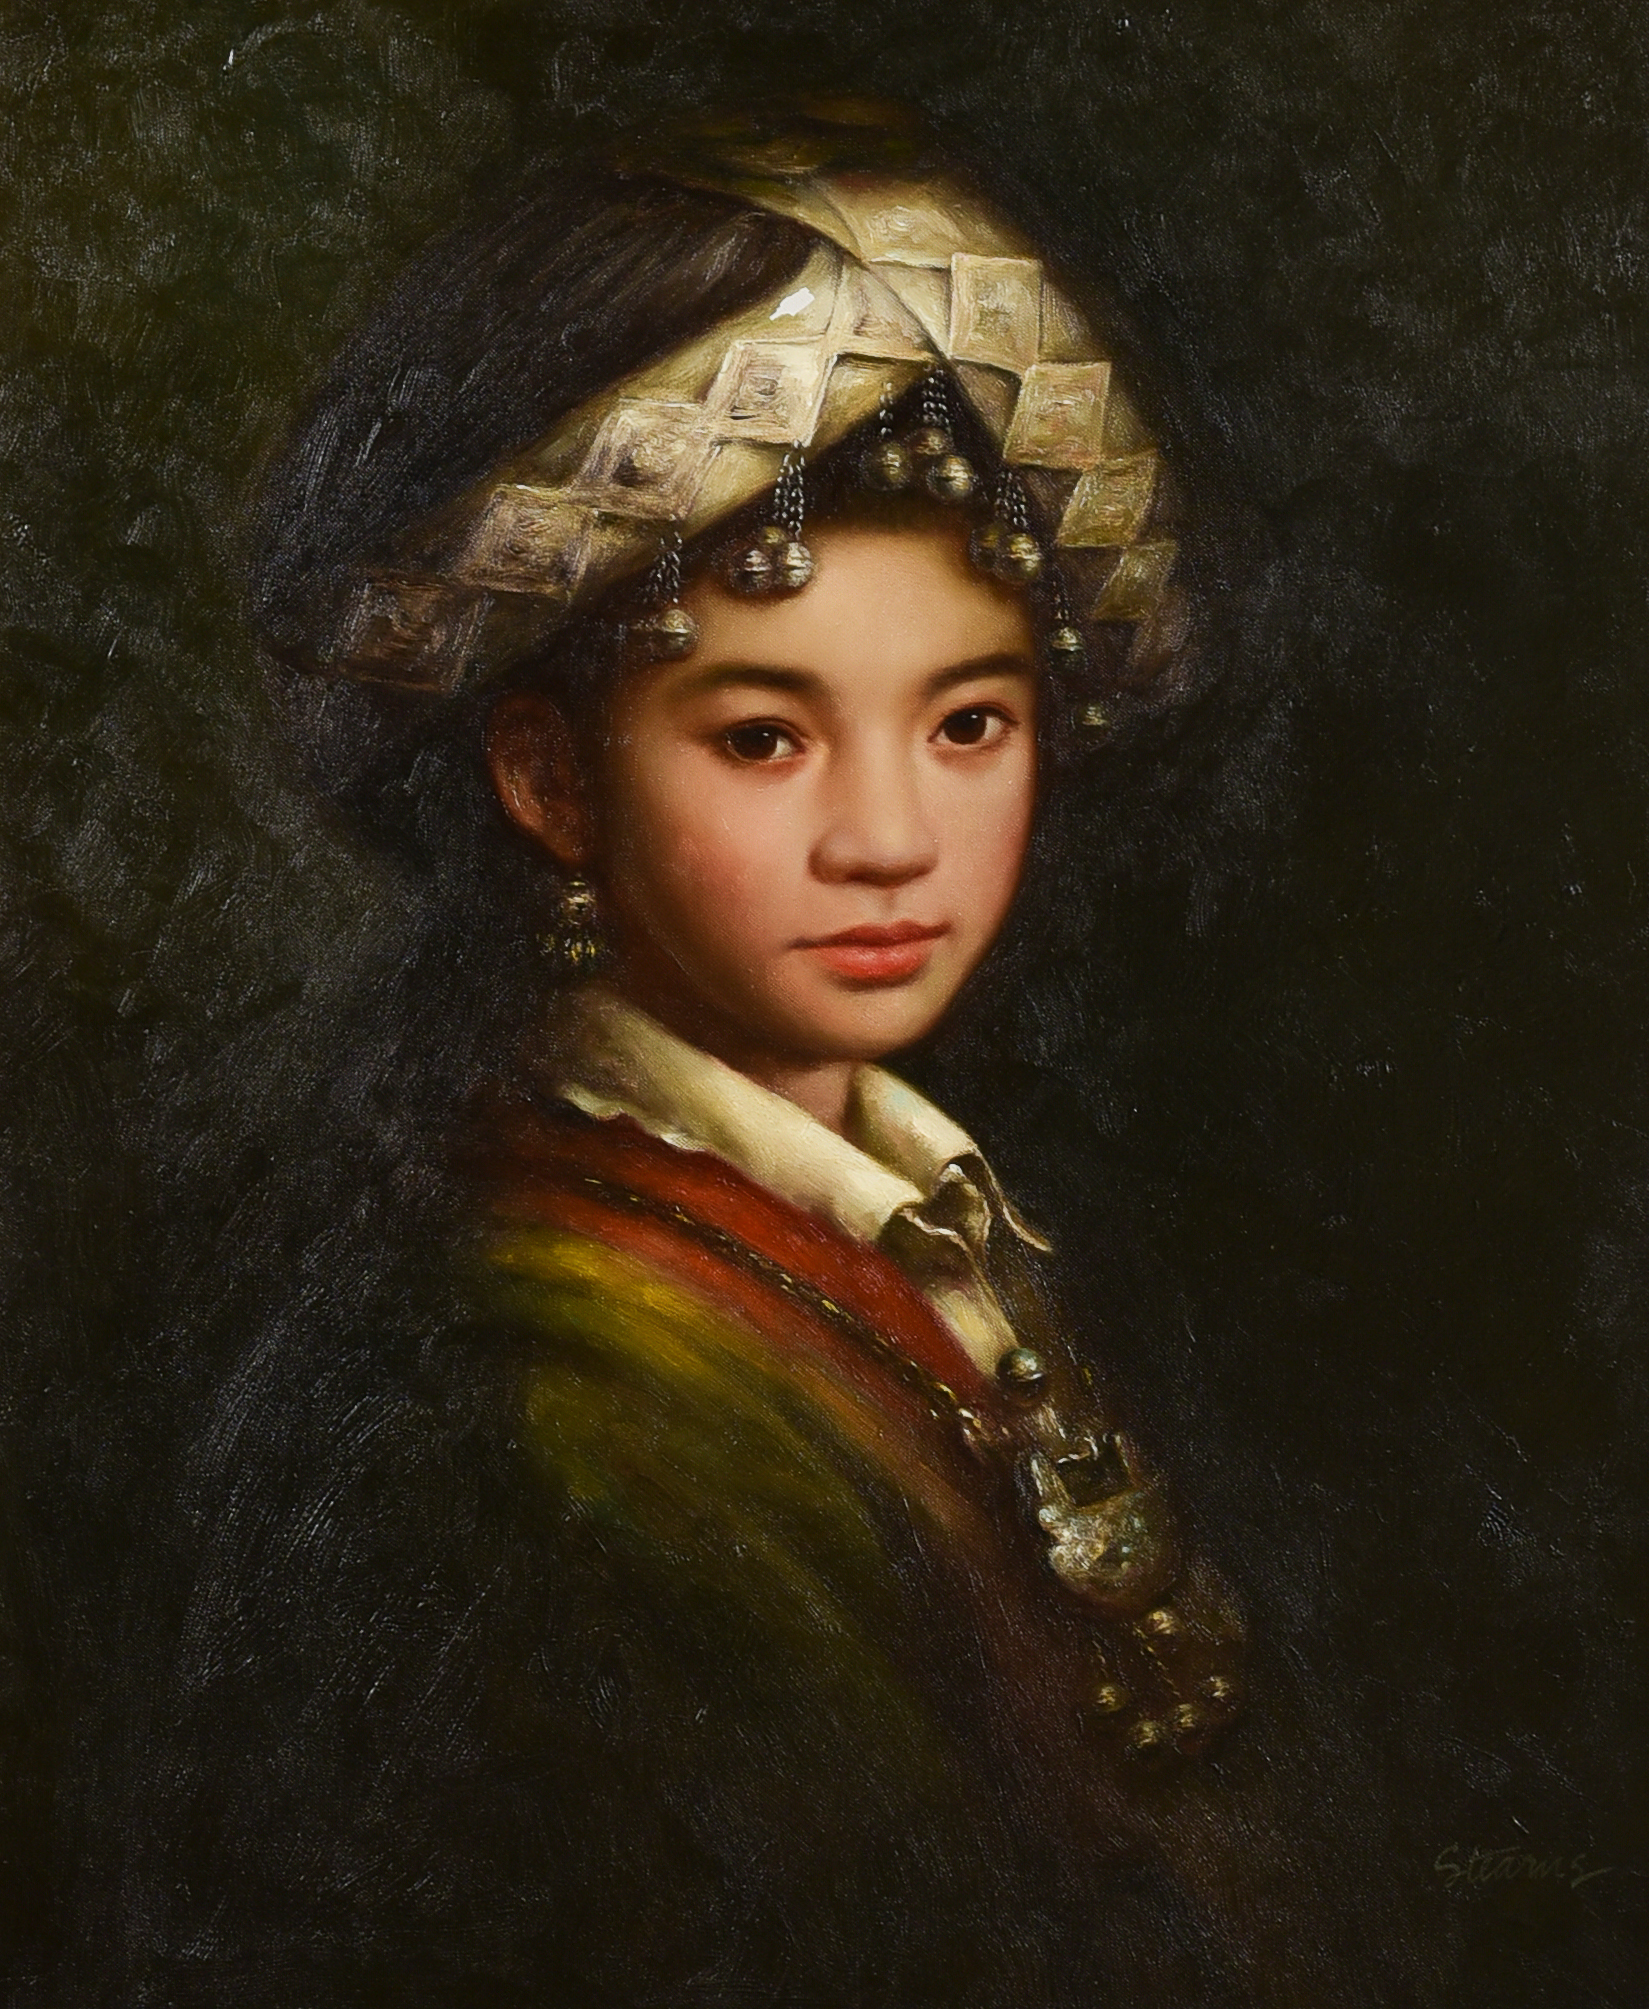 Reproduction portrait of an Asian